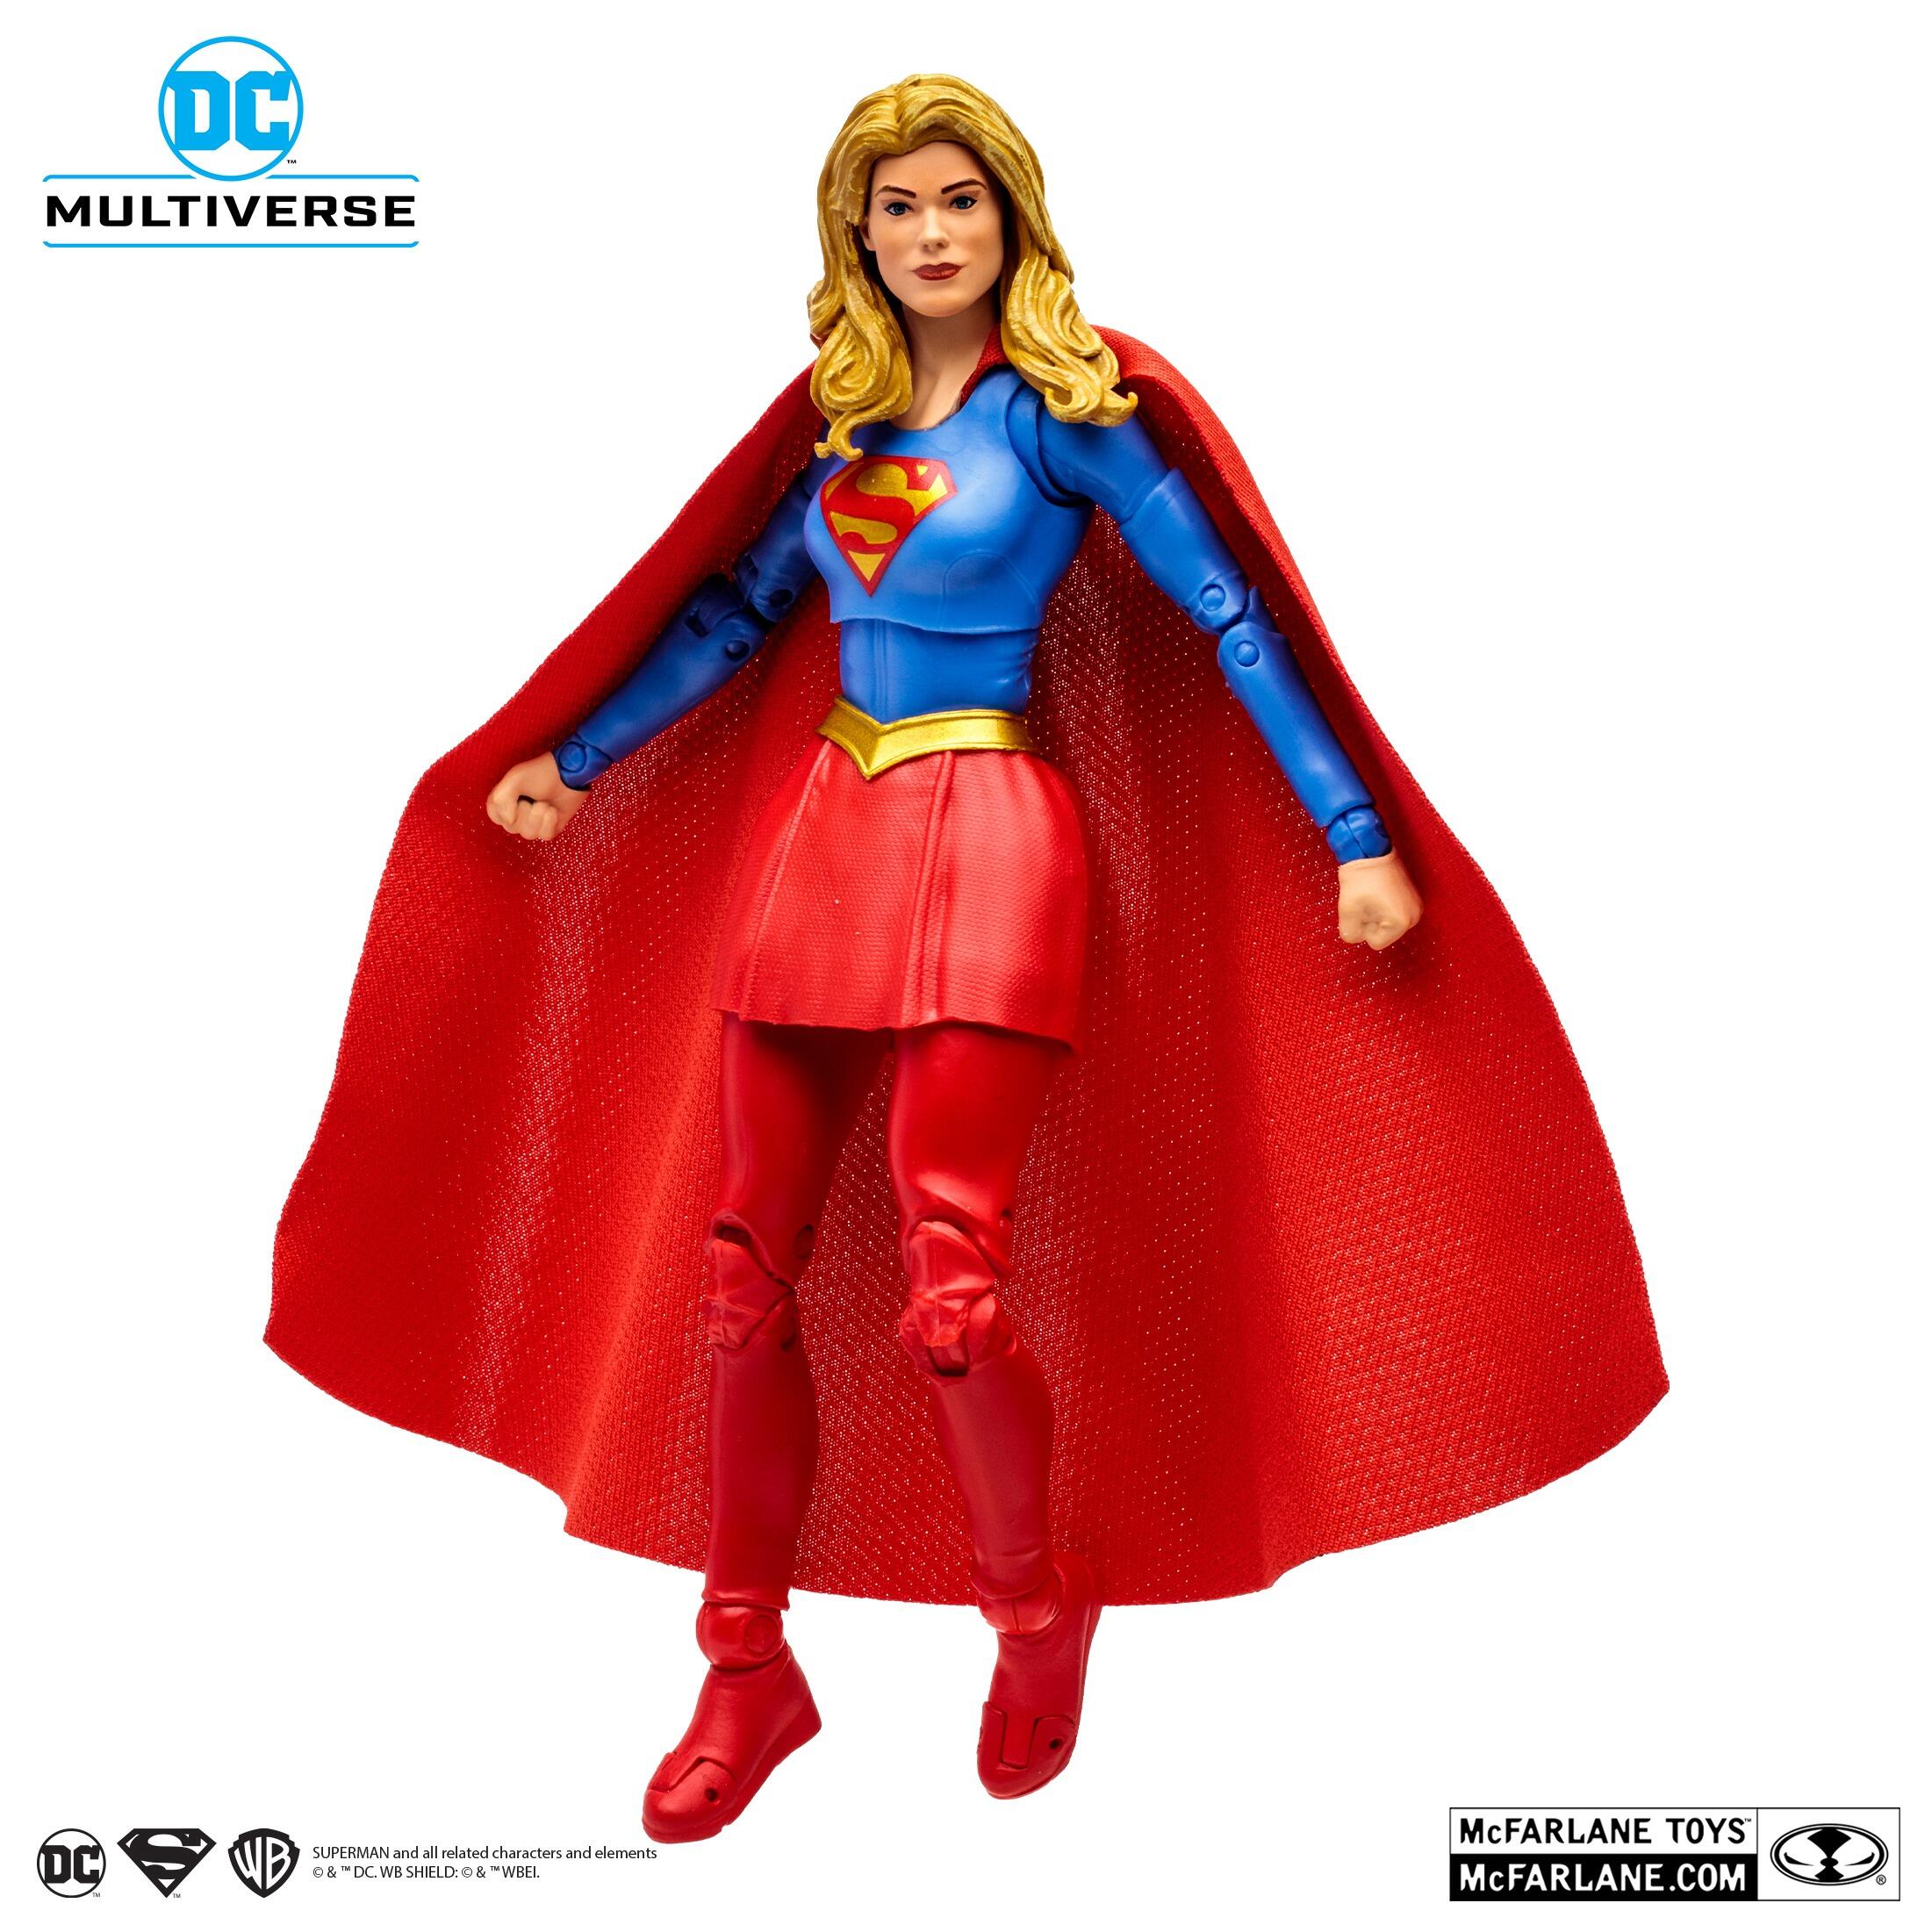 The Internet Reacts to Hot Toys' New Supergirl Figure